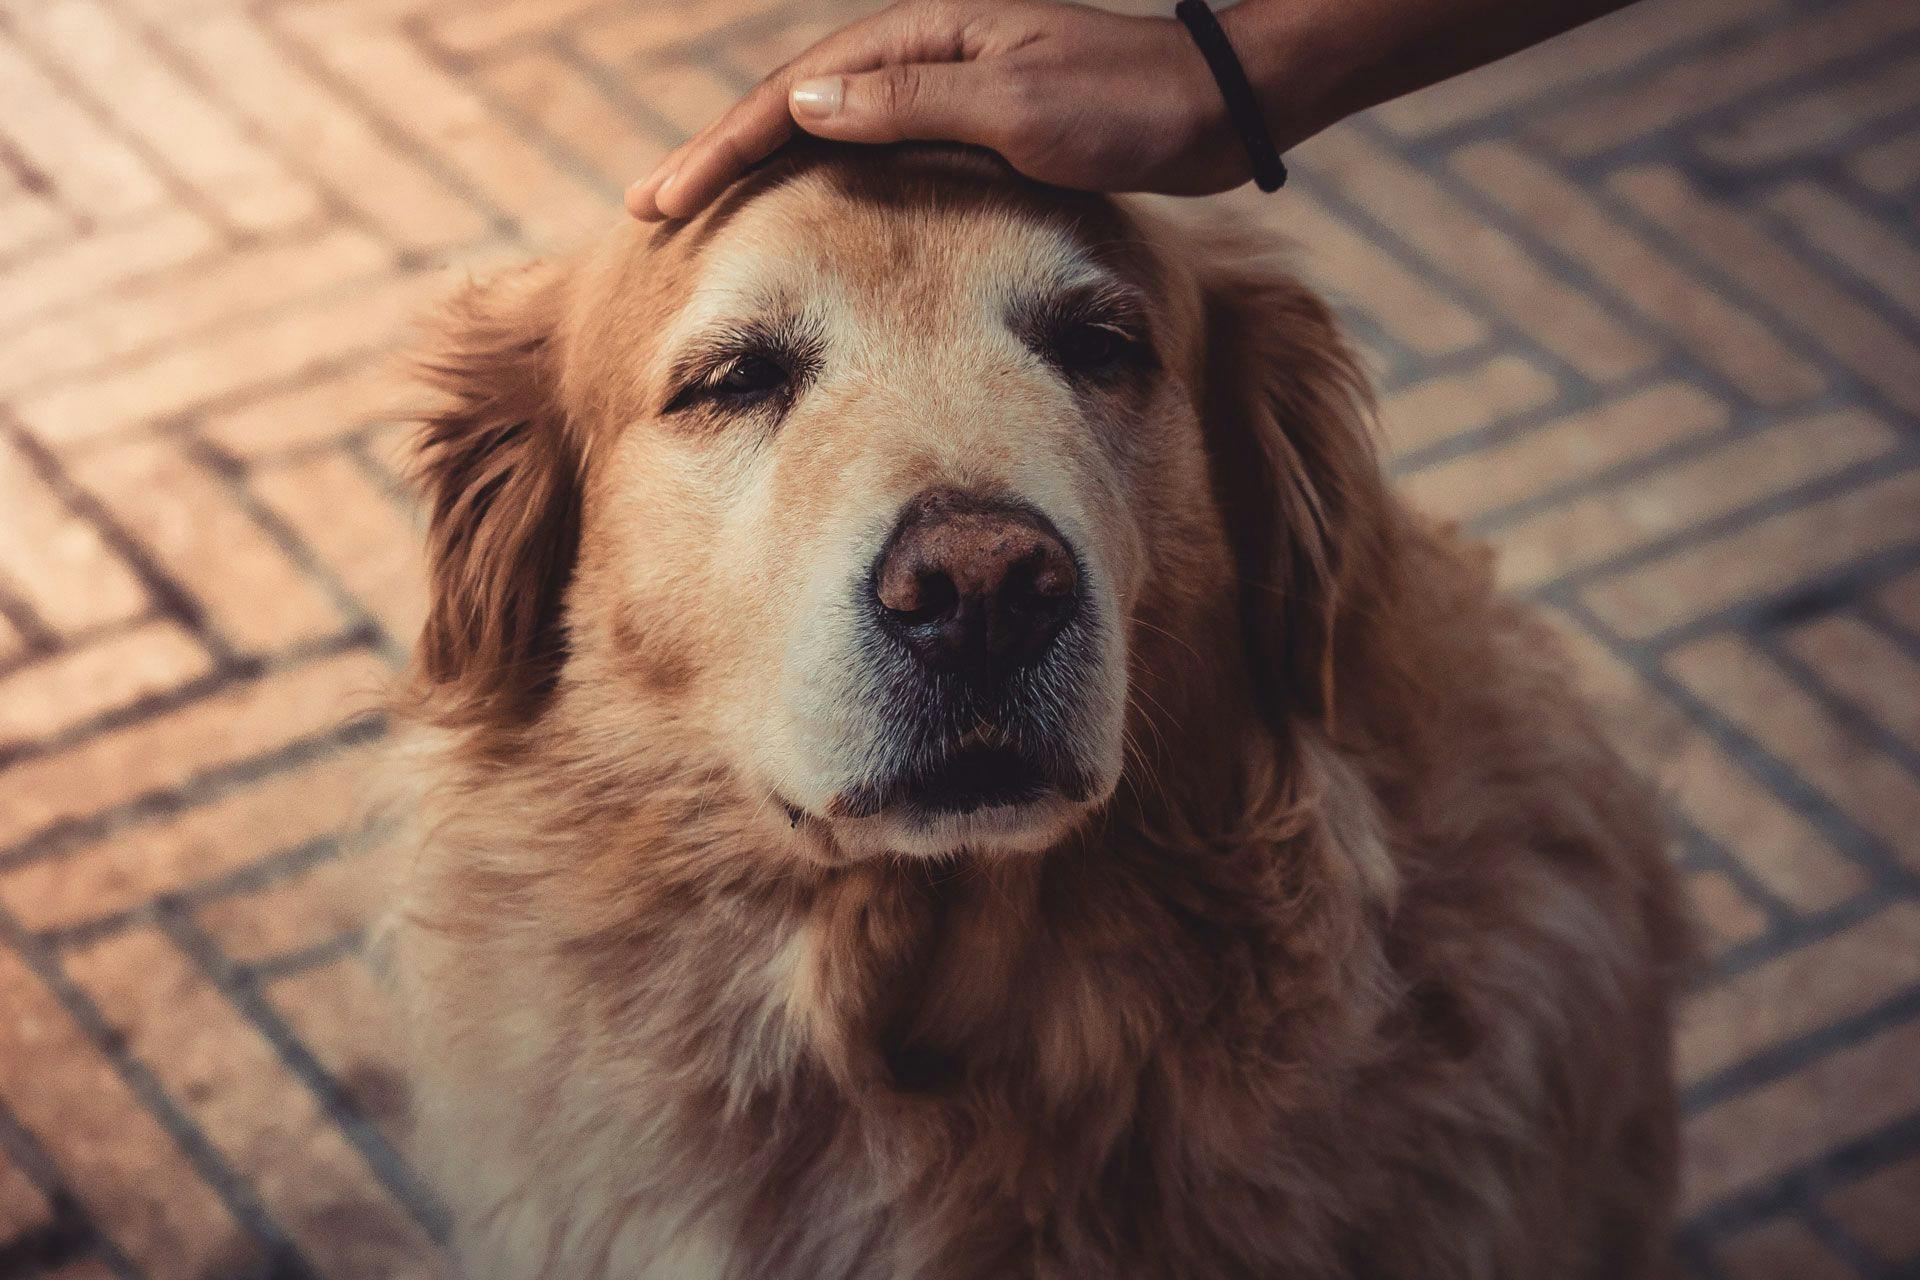 a senior golden retriever being petted by a person